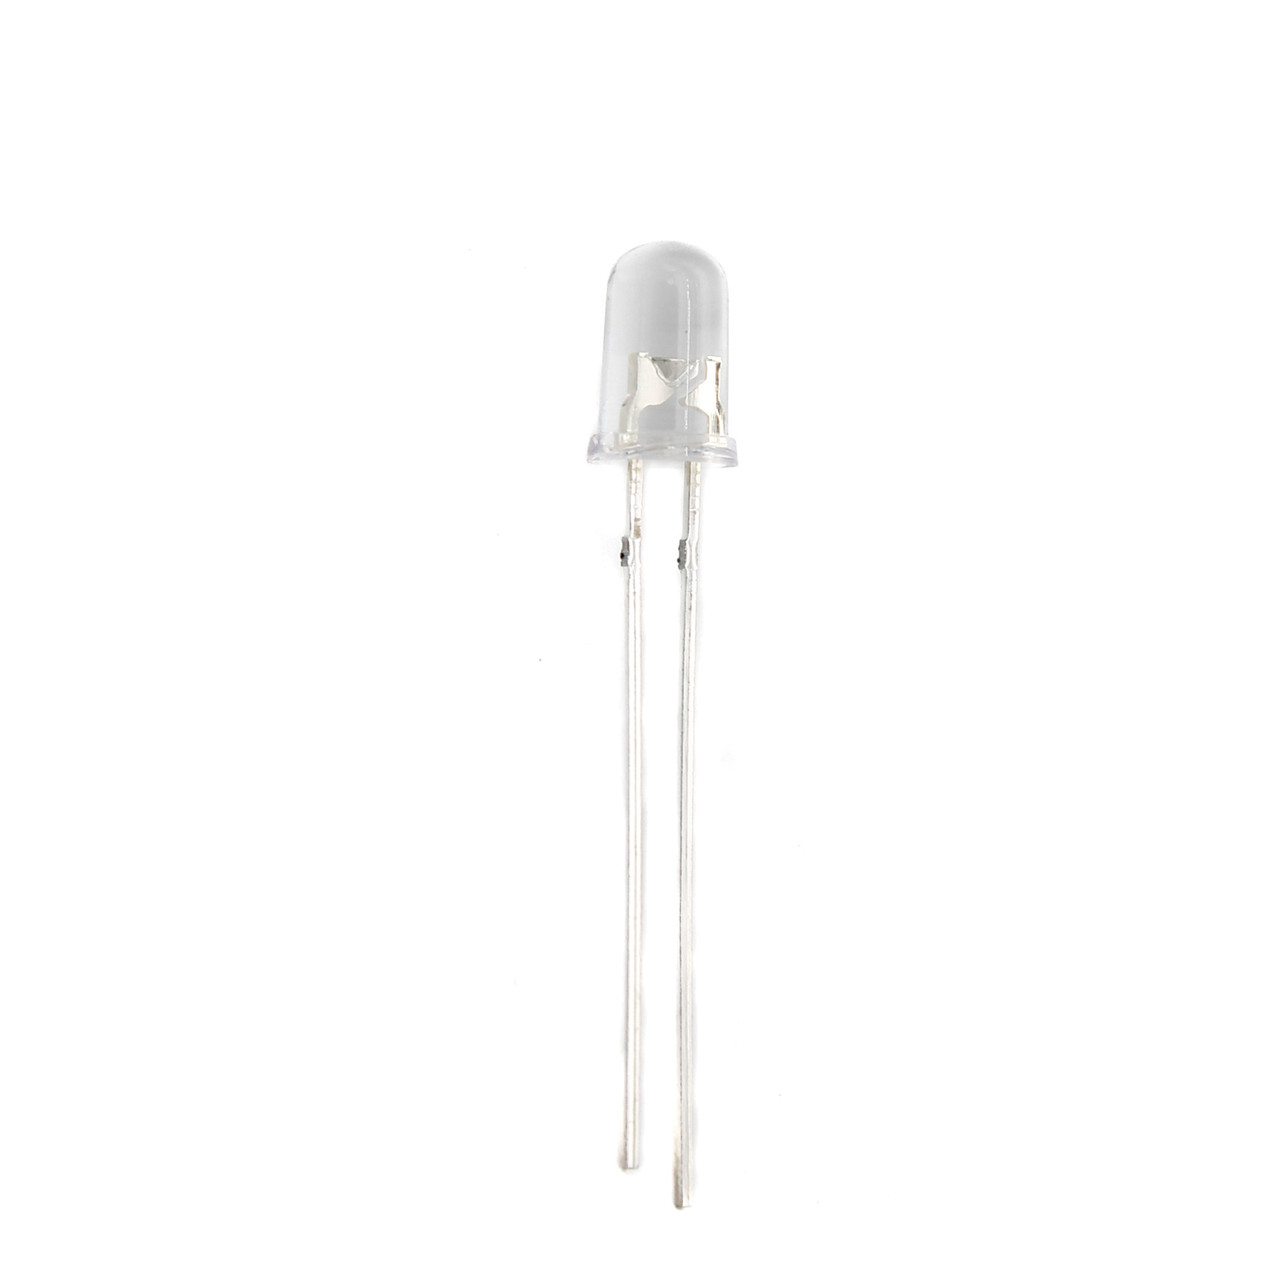 5mm LED - Waterclear - 10 Pack